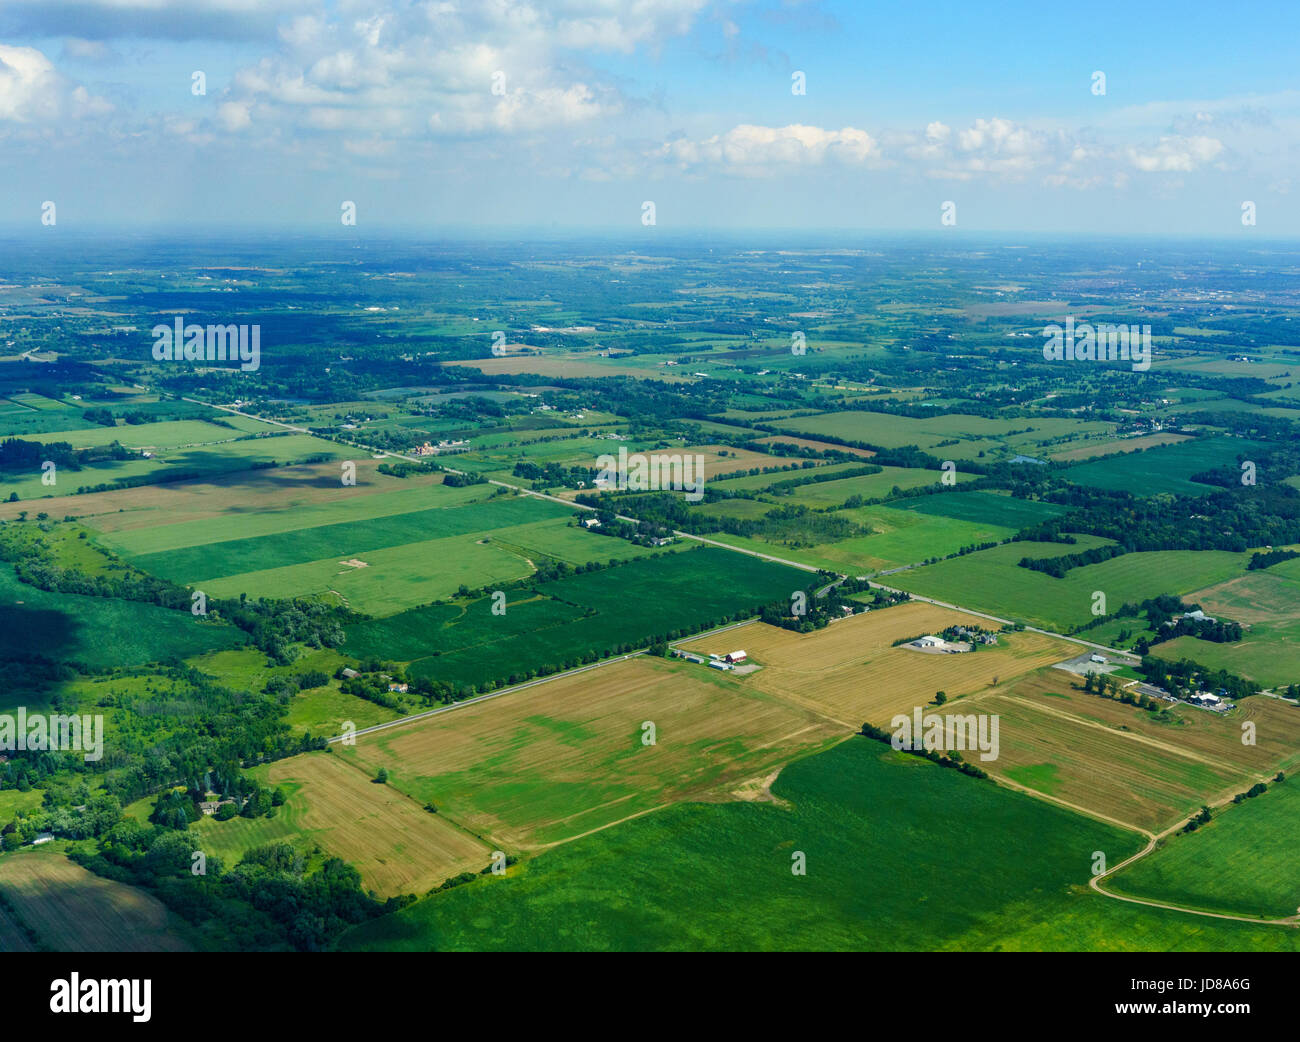 Aerial view at day of agricultural land in Toronto, Ontario, Canada. aerial picture from ontario canada 2016 Stock Photo